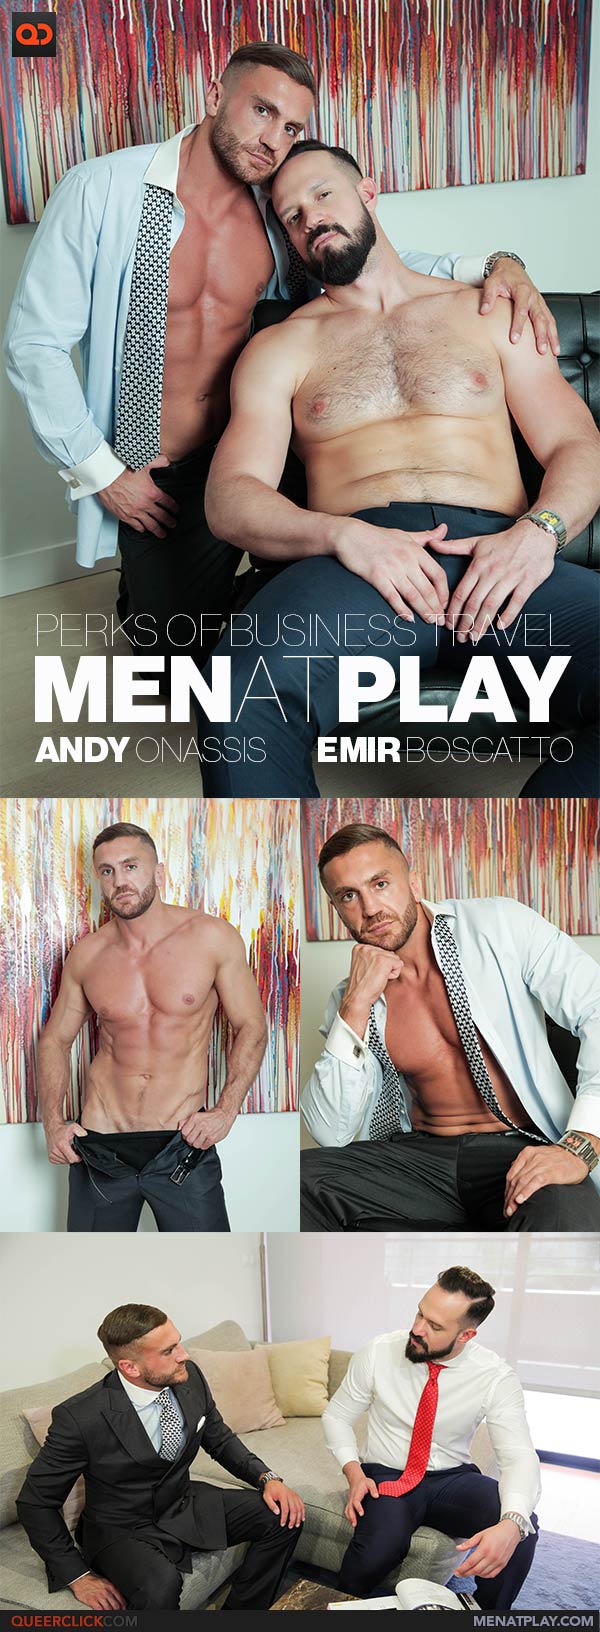 Men at Play: Andy Onassis and Emir Boscatto